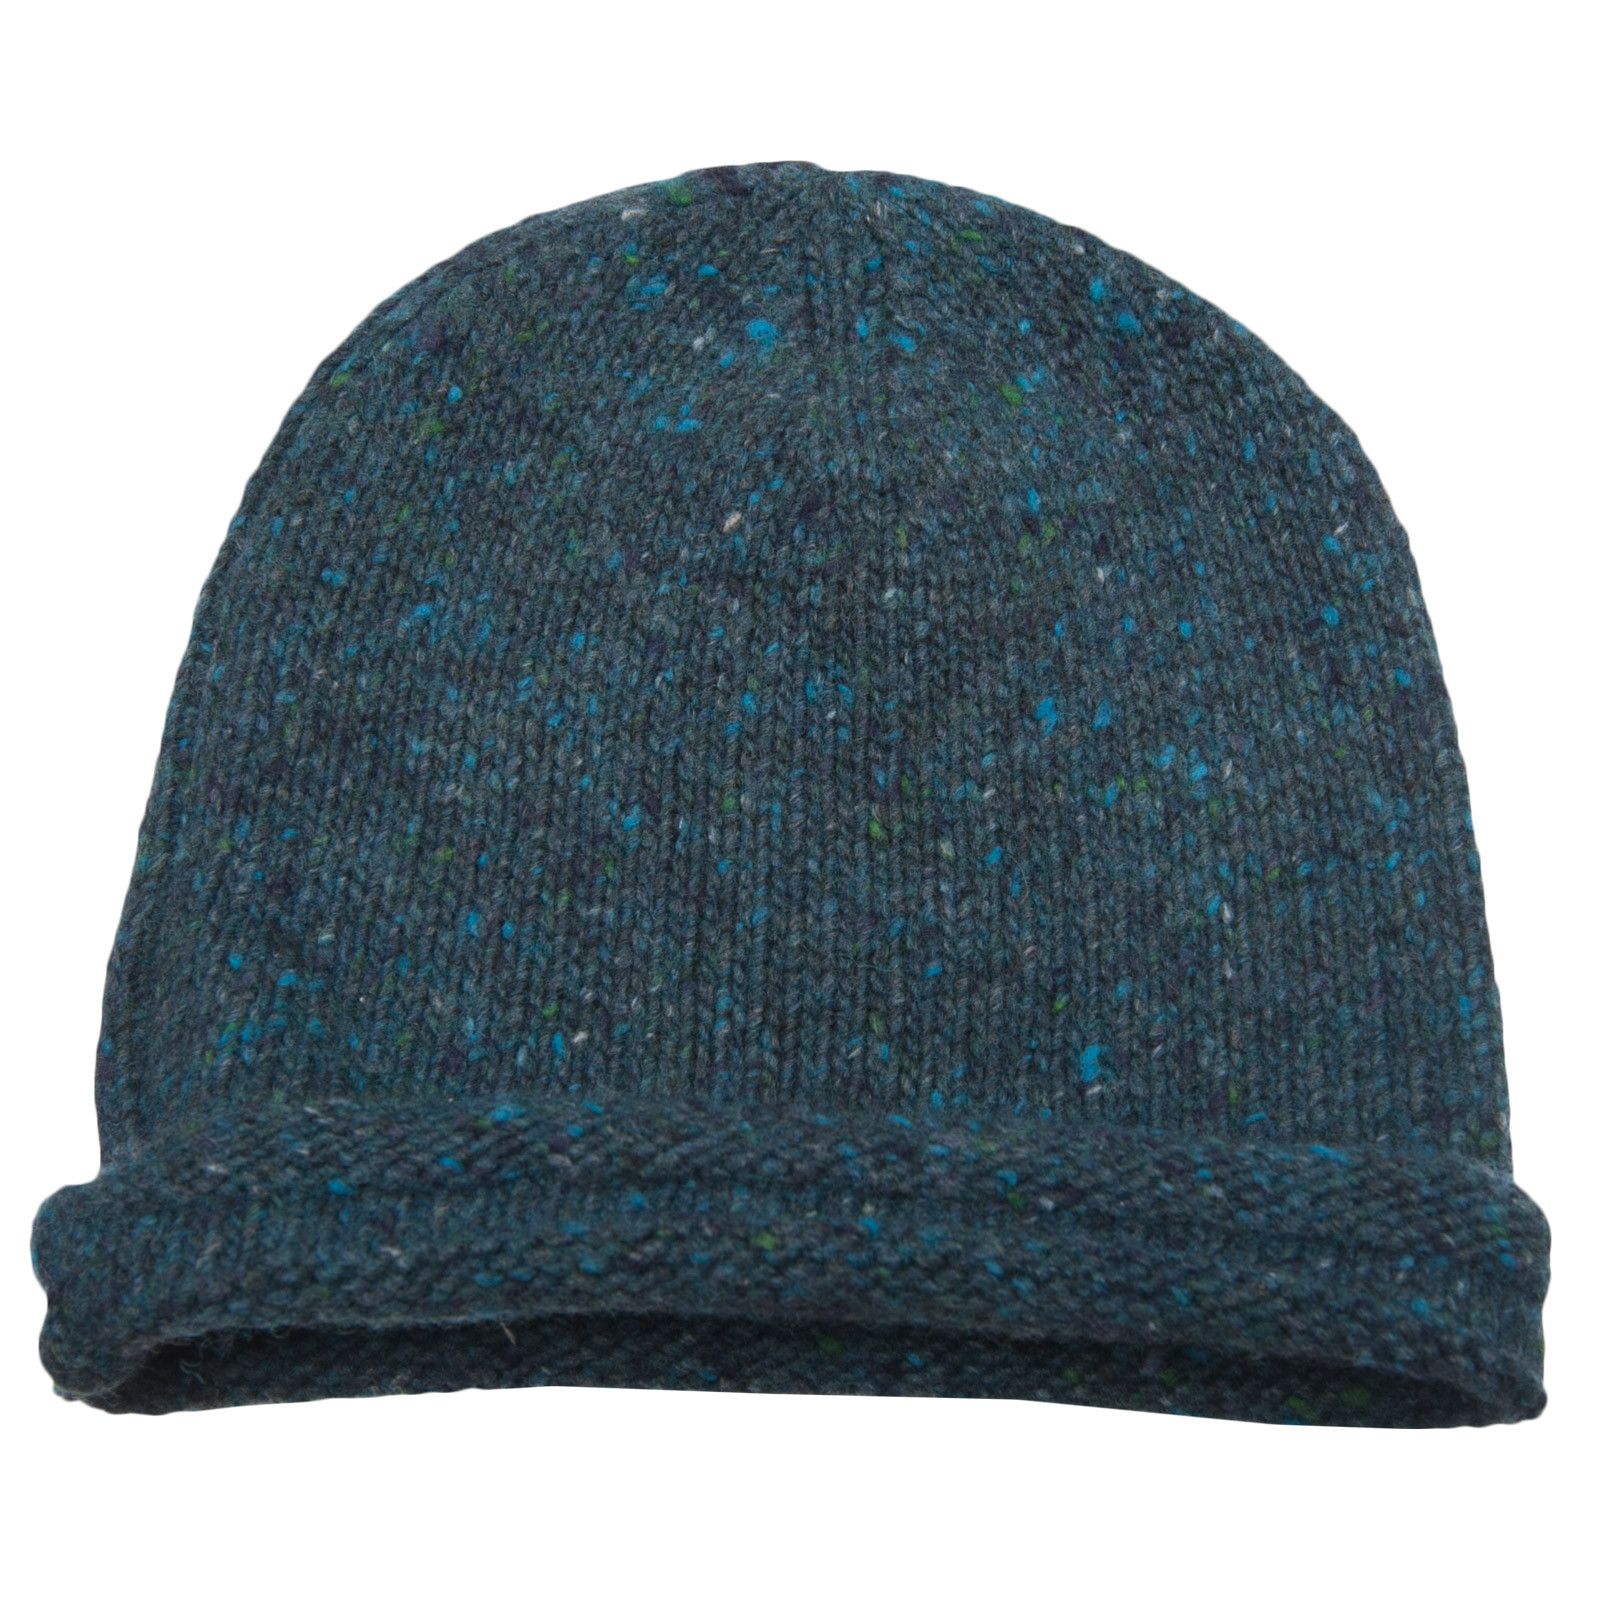 Boys Navy Blue Knitted Wool Hat - CÉMAROSE | Children's Fashion Store - 1